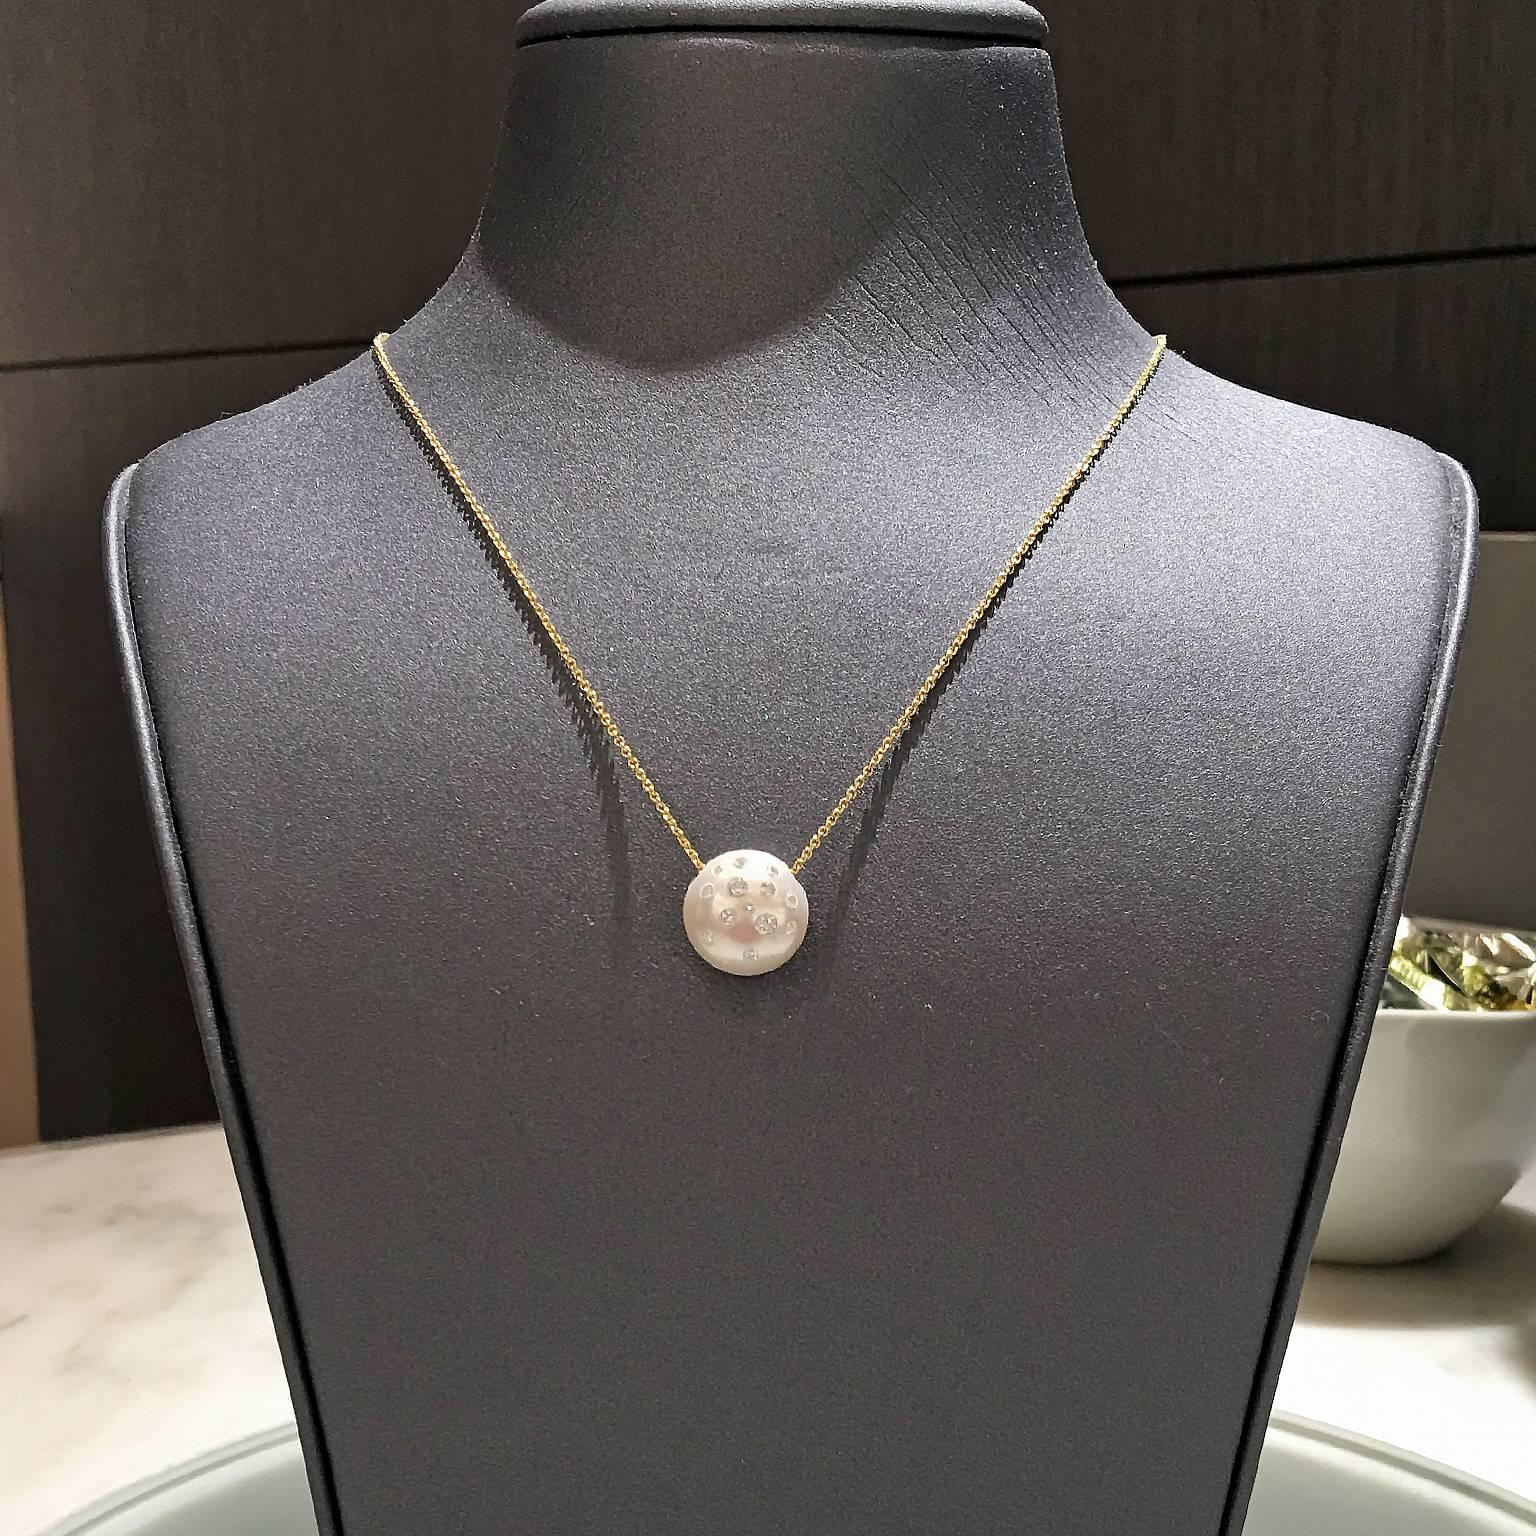 Freshwater Pearl Drop Necklace by renowned jewelry designer showcases a stunning, lustrous white freshwater pearl (12mm x 12mm x 10mm) with pink and violet tone. The pearl features 0.38 total carats of Russell's signature embedded round